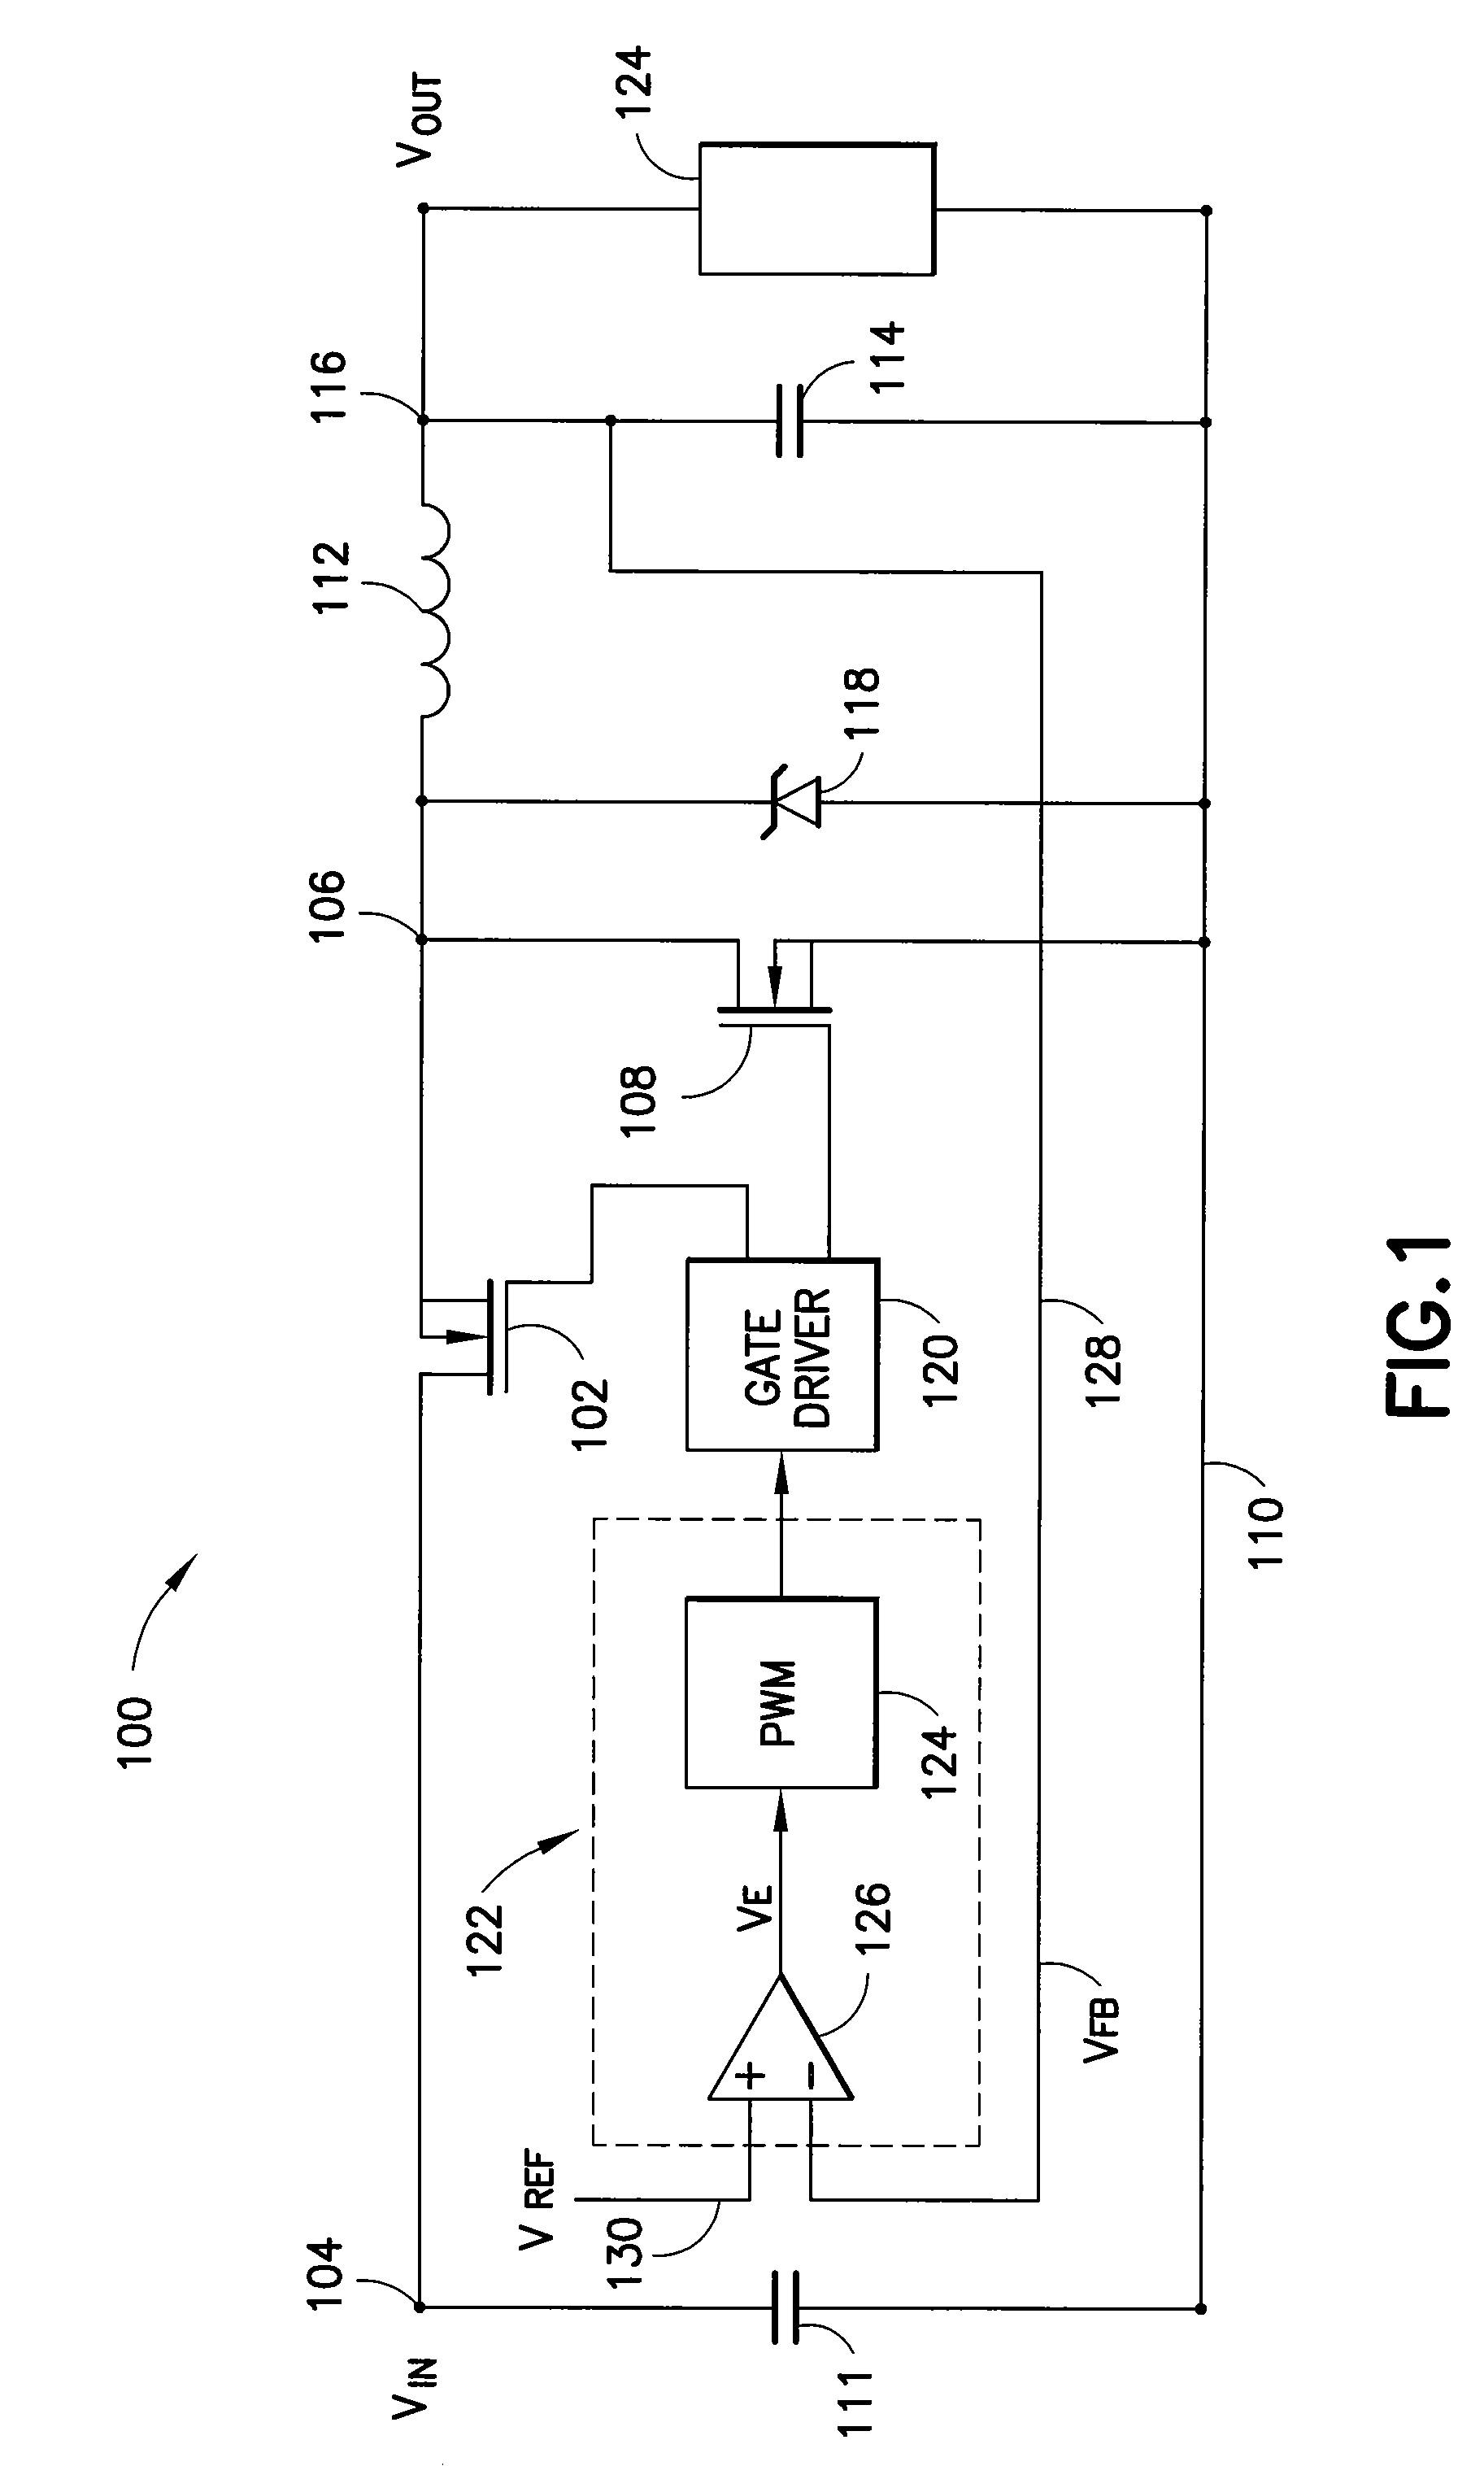 Buck converter having improved transient response to load step down